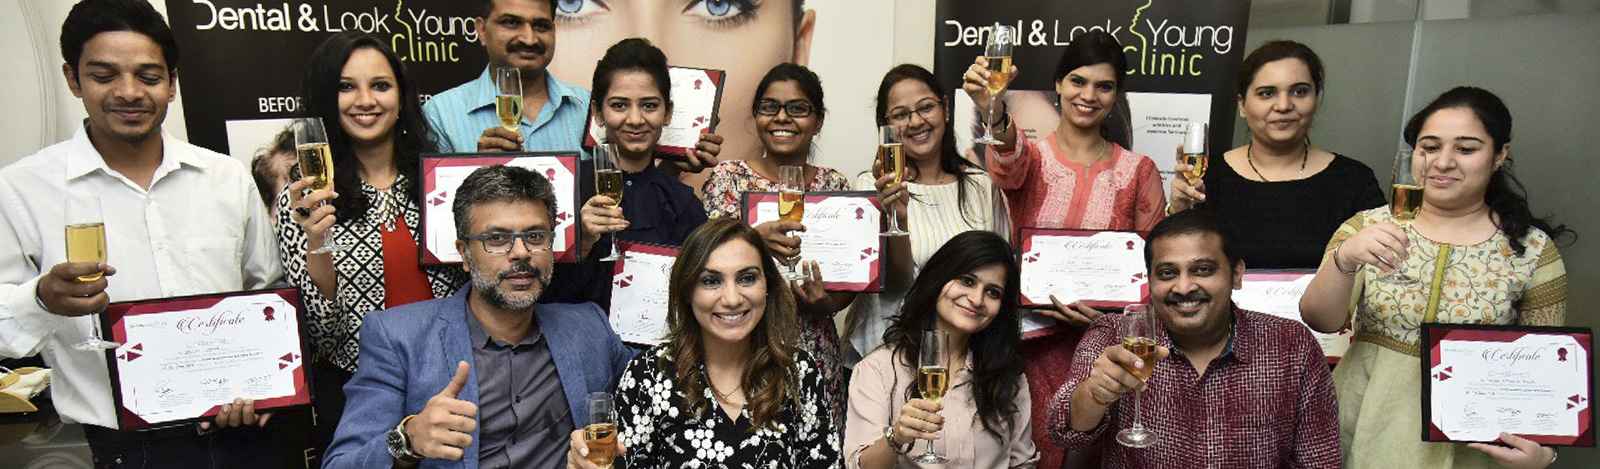 Dental Courses In India, Dental Clinical Courses In Delhi, Dental Courses In India, Dental Clinical Courses In Delhi